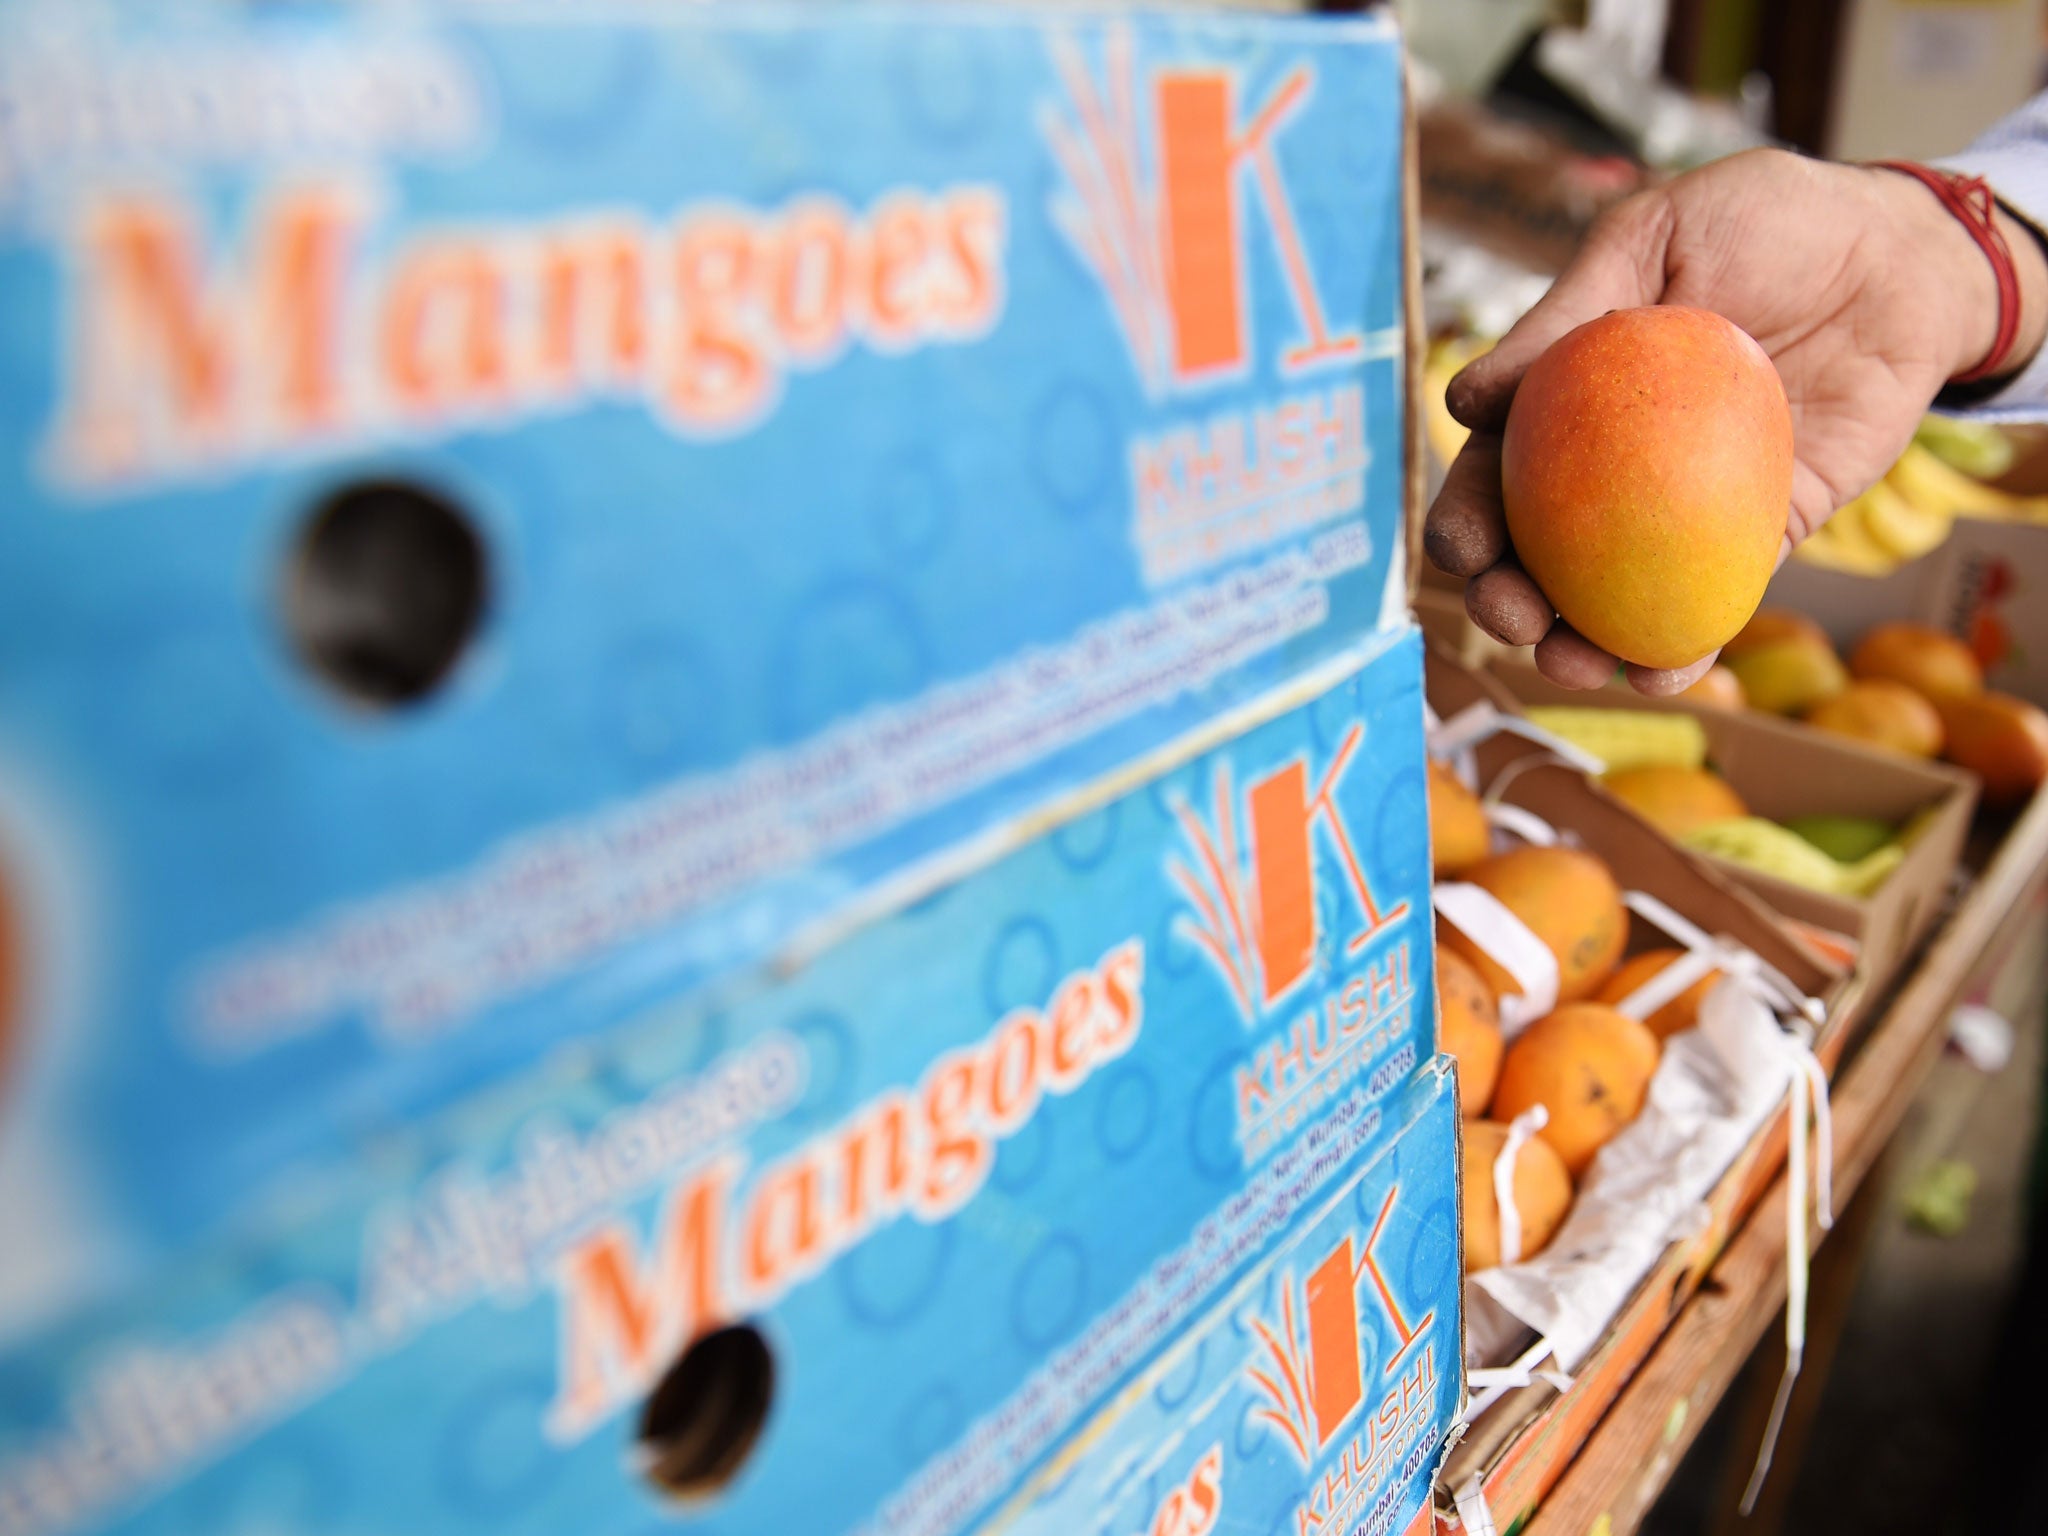 Imports of Alphonso mangoes will begin again in March